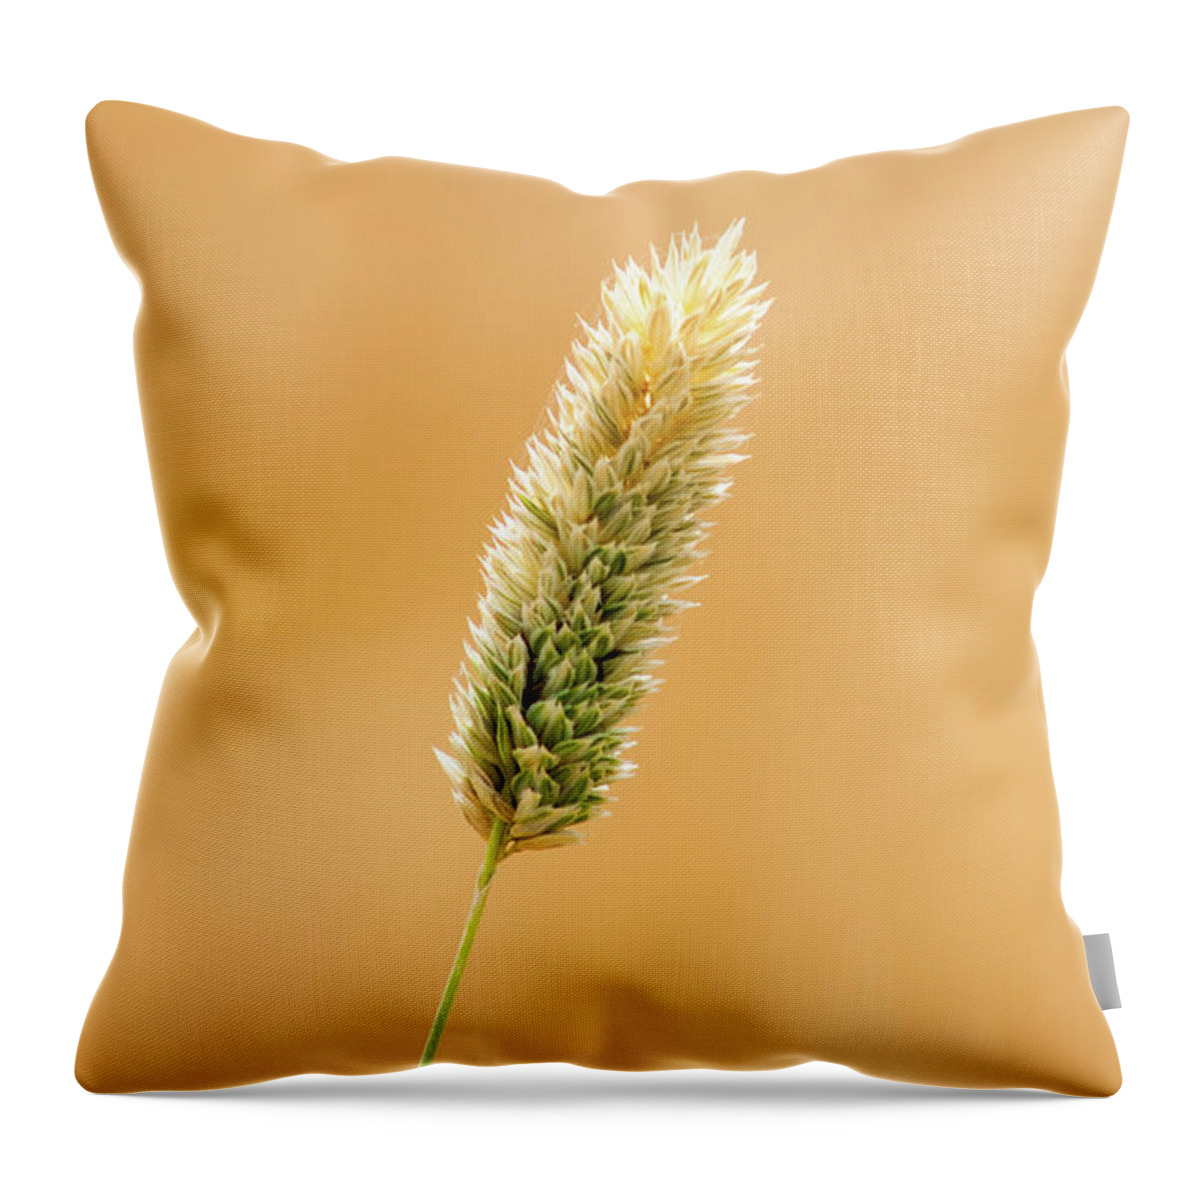 Outdoors Throw Pillow featuring the photograph Wheat Fields In Hala by M.omair